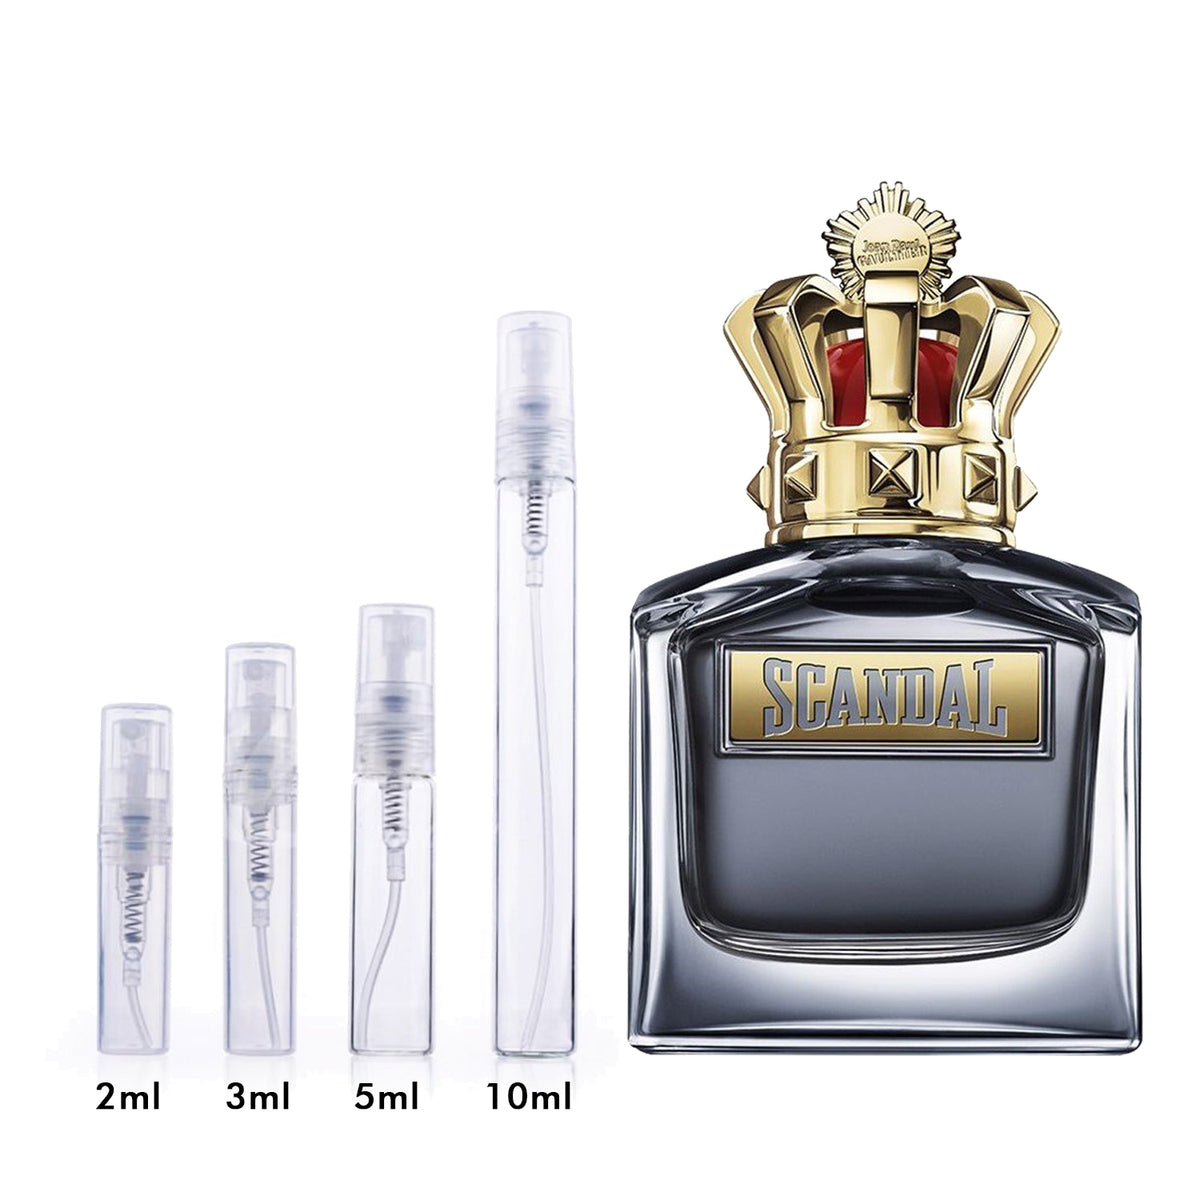 Scandal Pour Homme (INSPIRATION) - Galaxy Concept Knockout Body